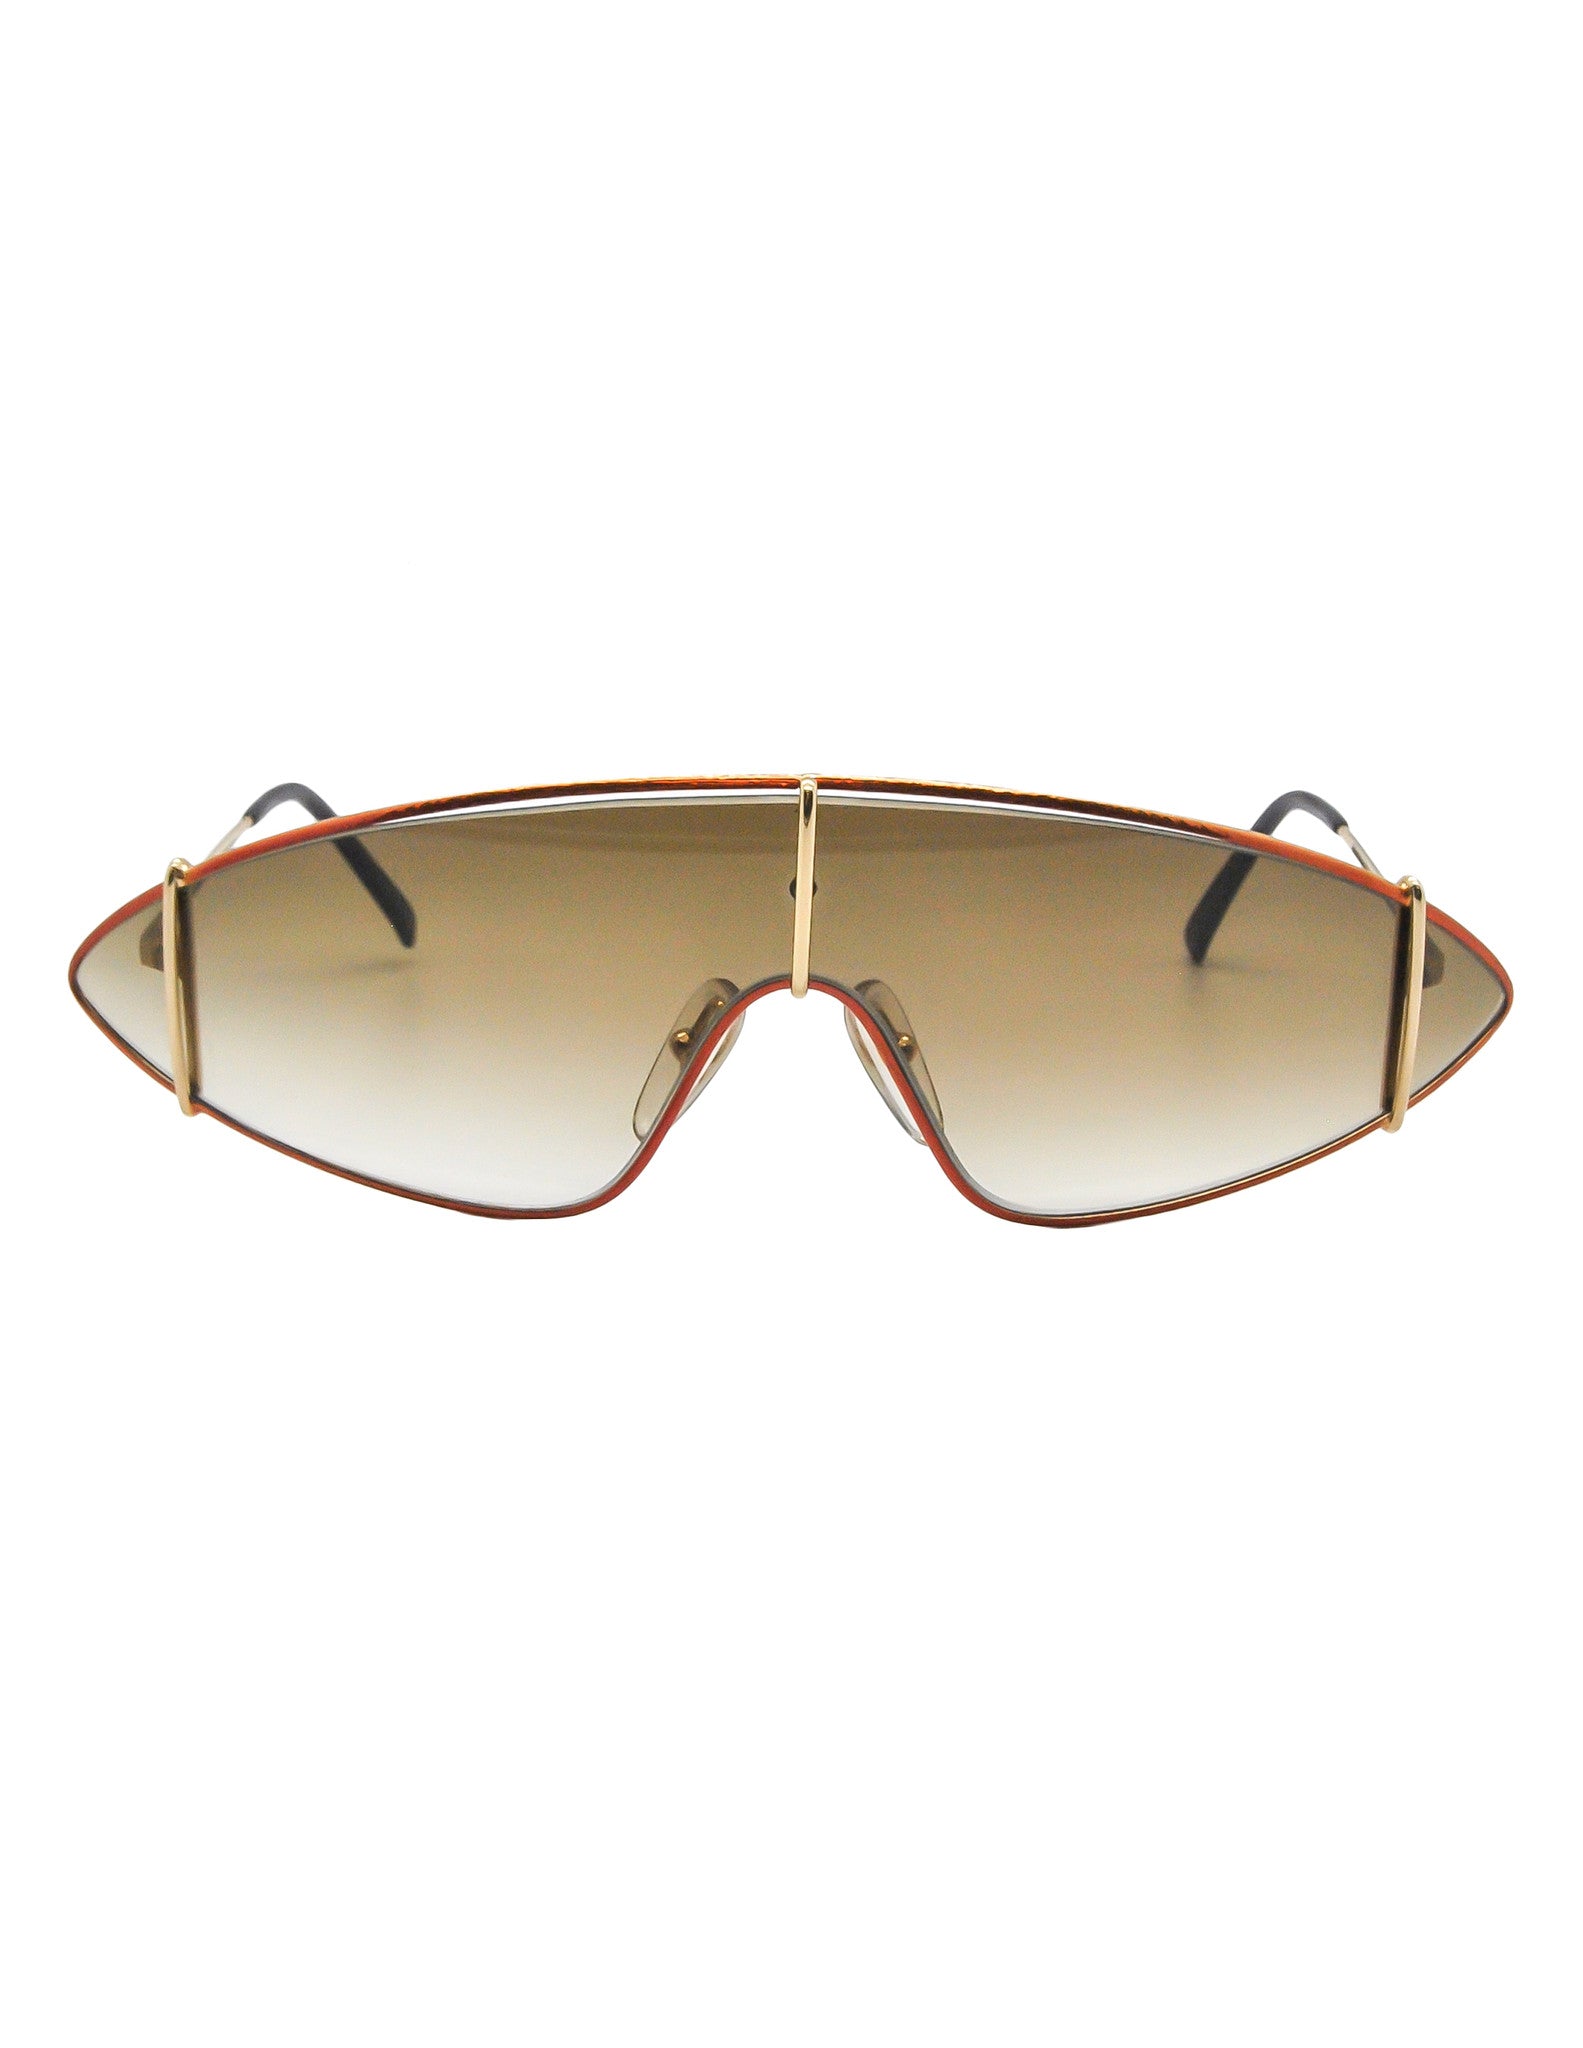 Paloma Picasso Vintage Orange and Gold Space Sunglasses 3728